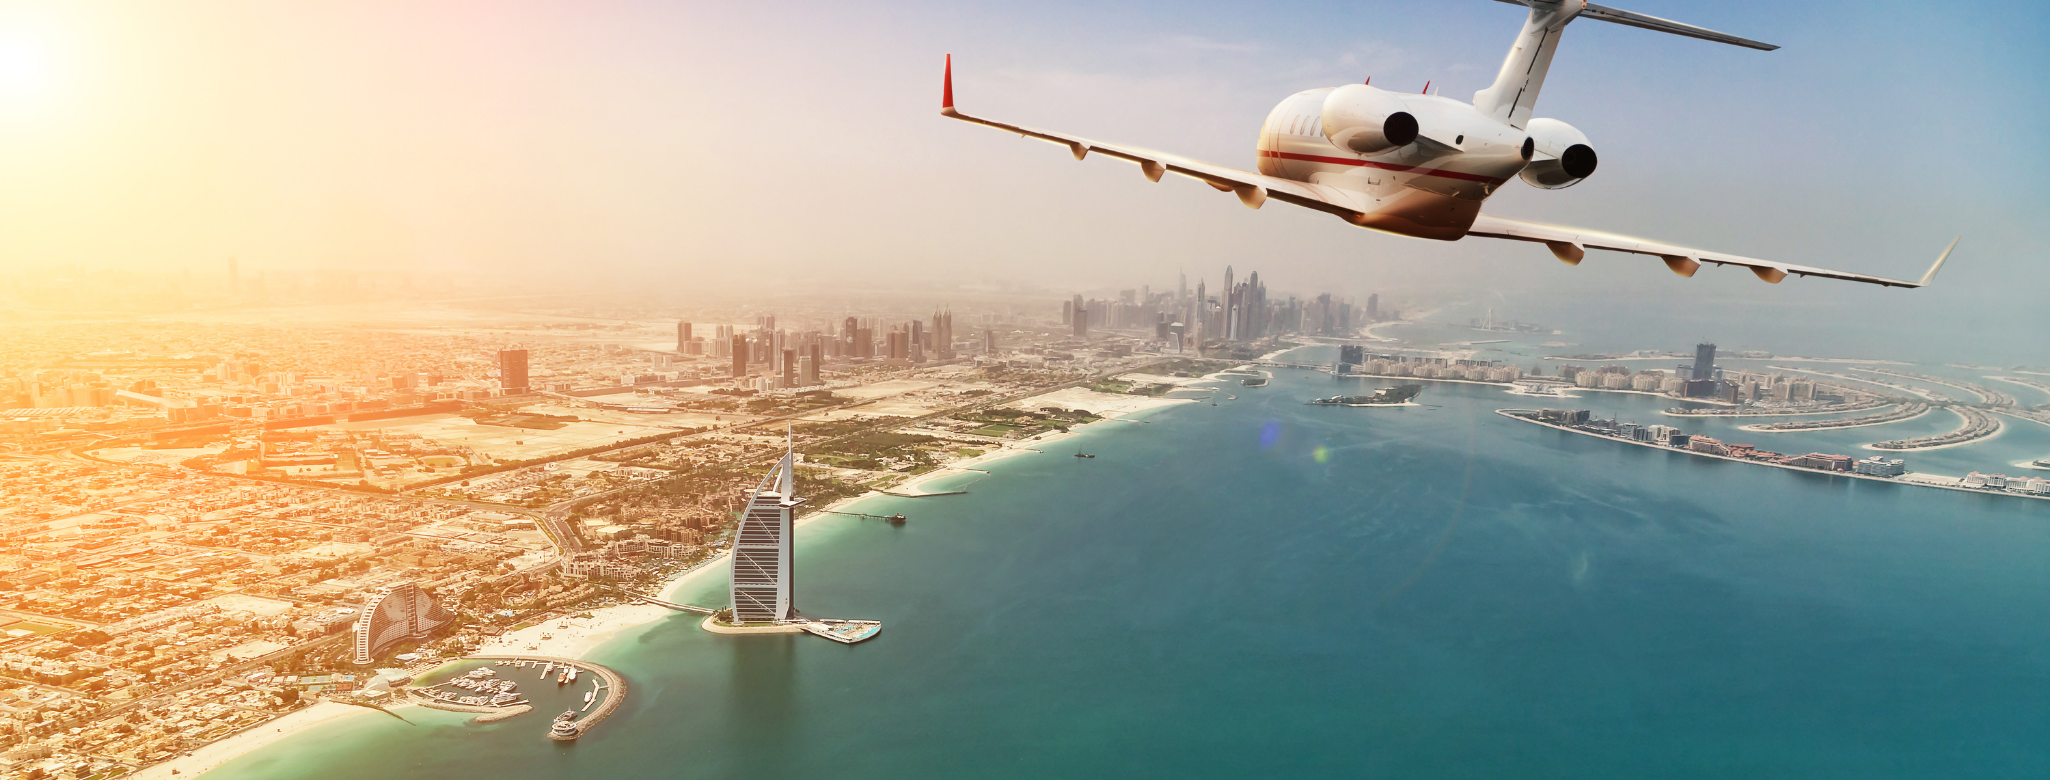 Entry regulations to the UAE